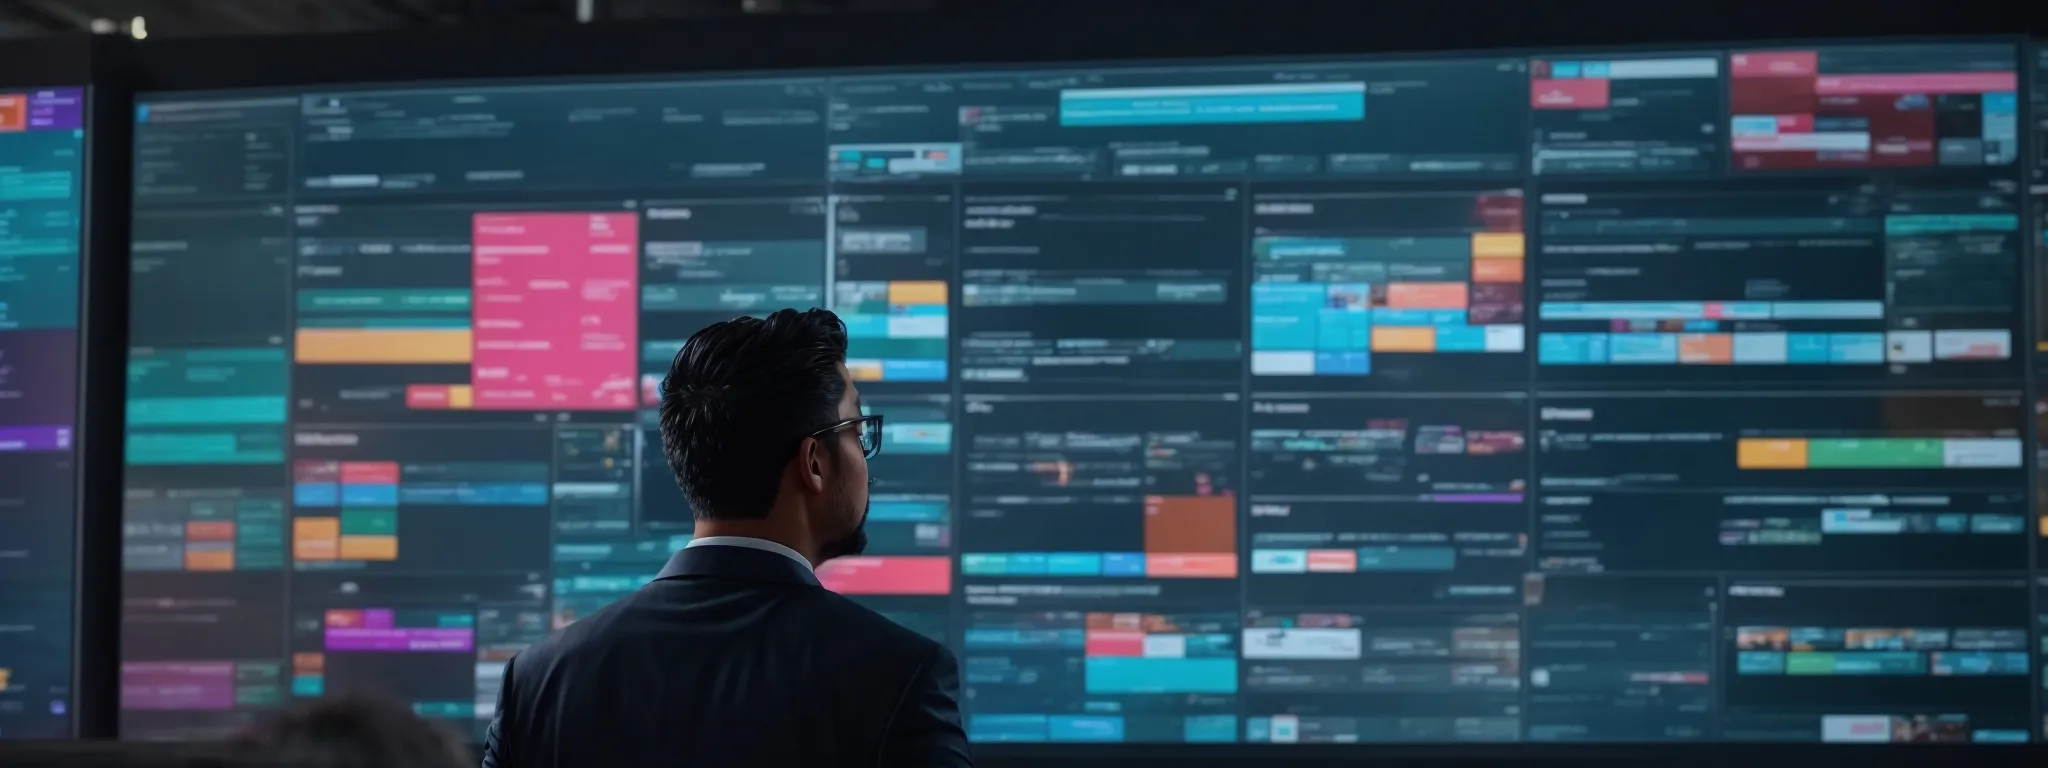 a marketer strategizing with a vibrant display of trending hashtags on a digital screen.